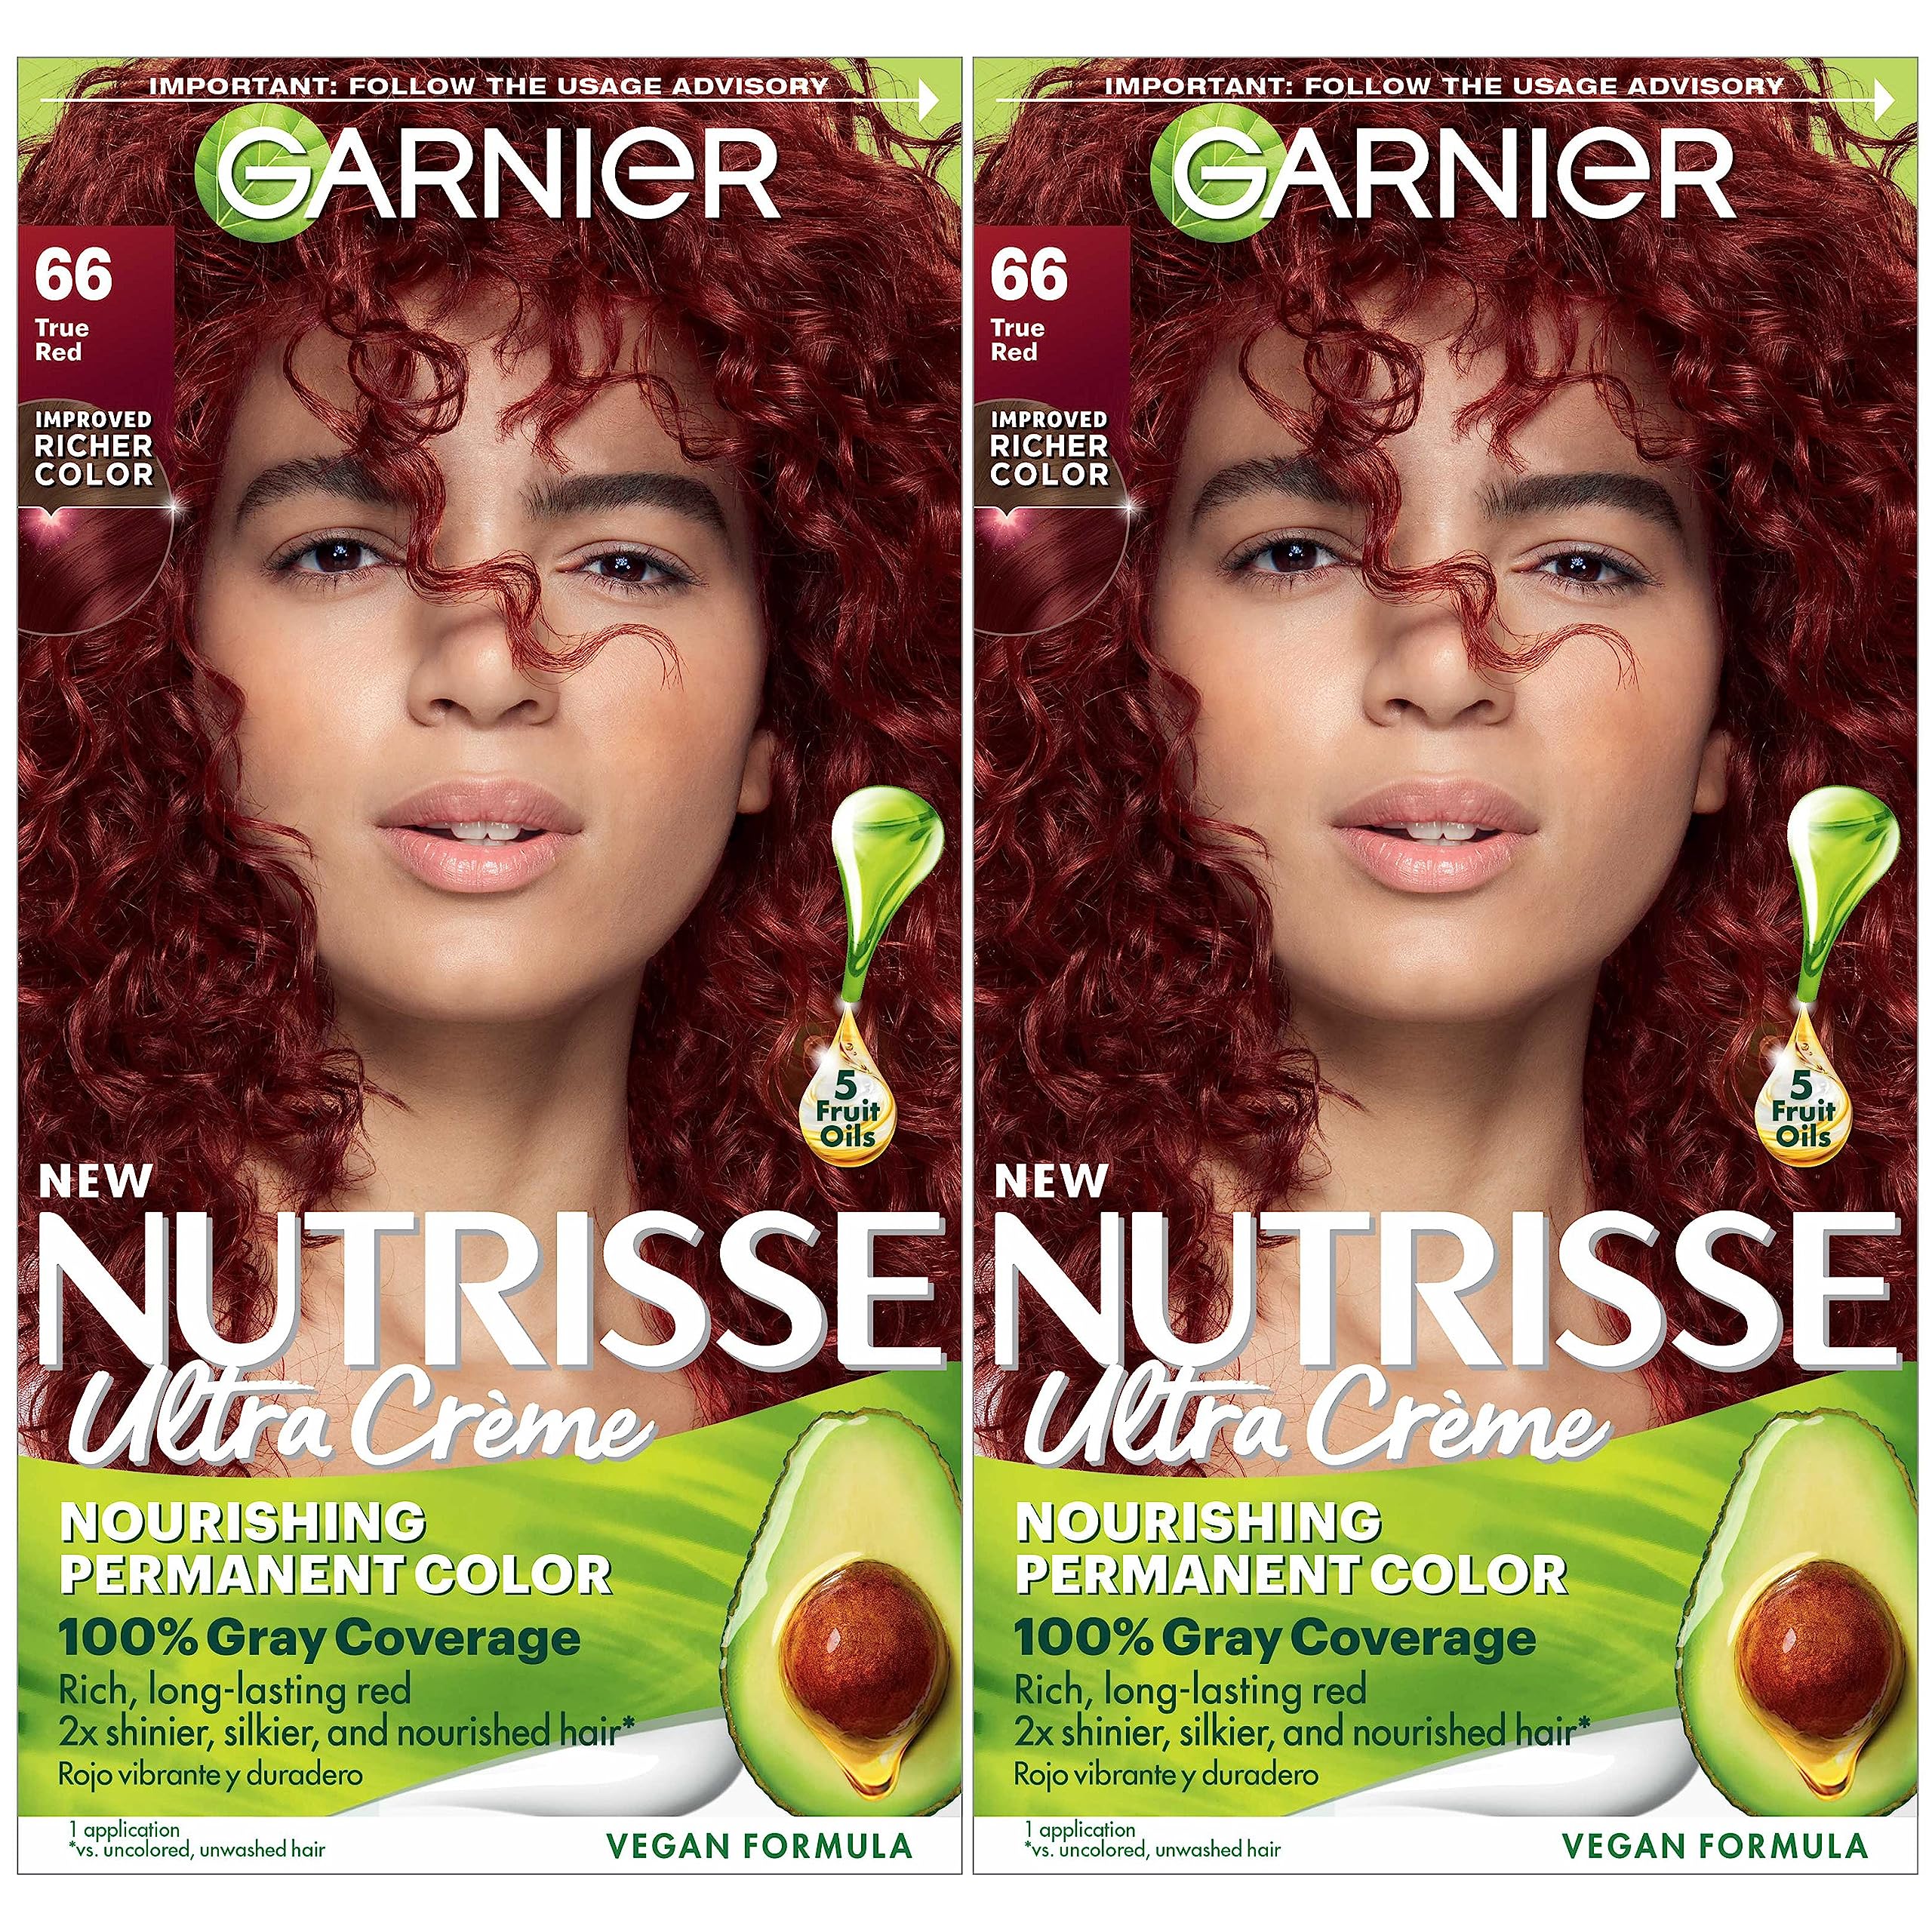 Garnier Hair Color Nutrisse Nourishing Creme, 66 True Red (Pomegranate) Permanent Hair Dye, 2 Count (Packaging May Vary)